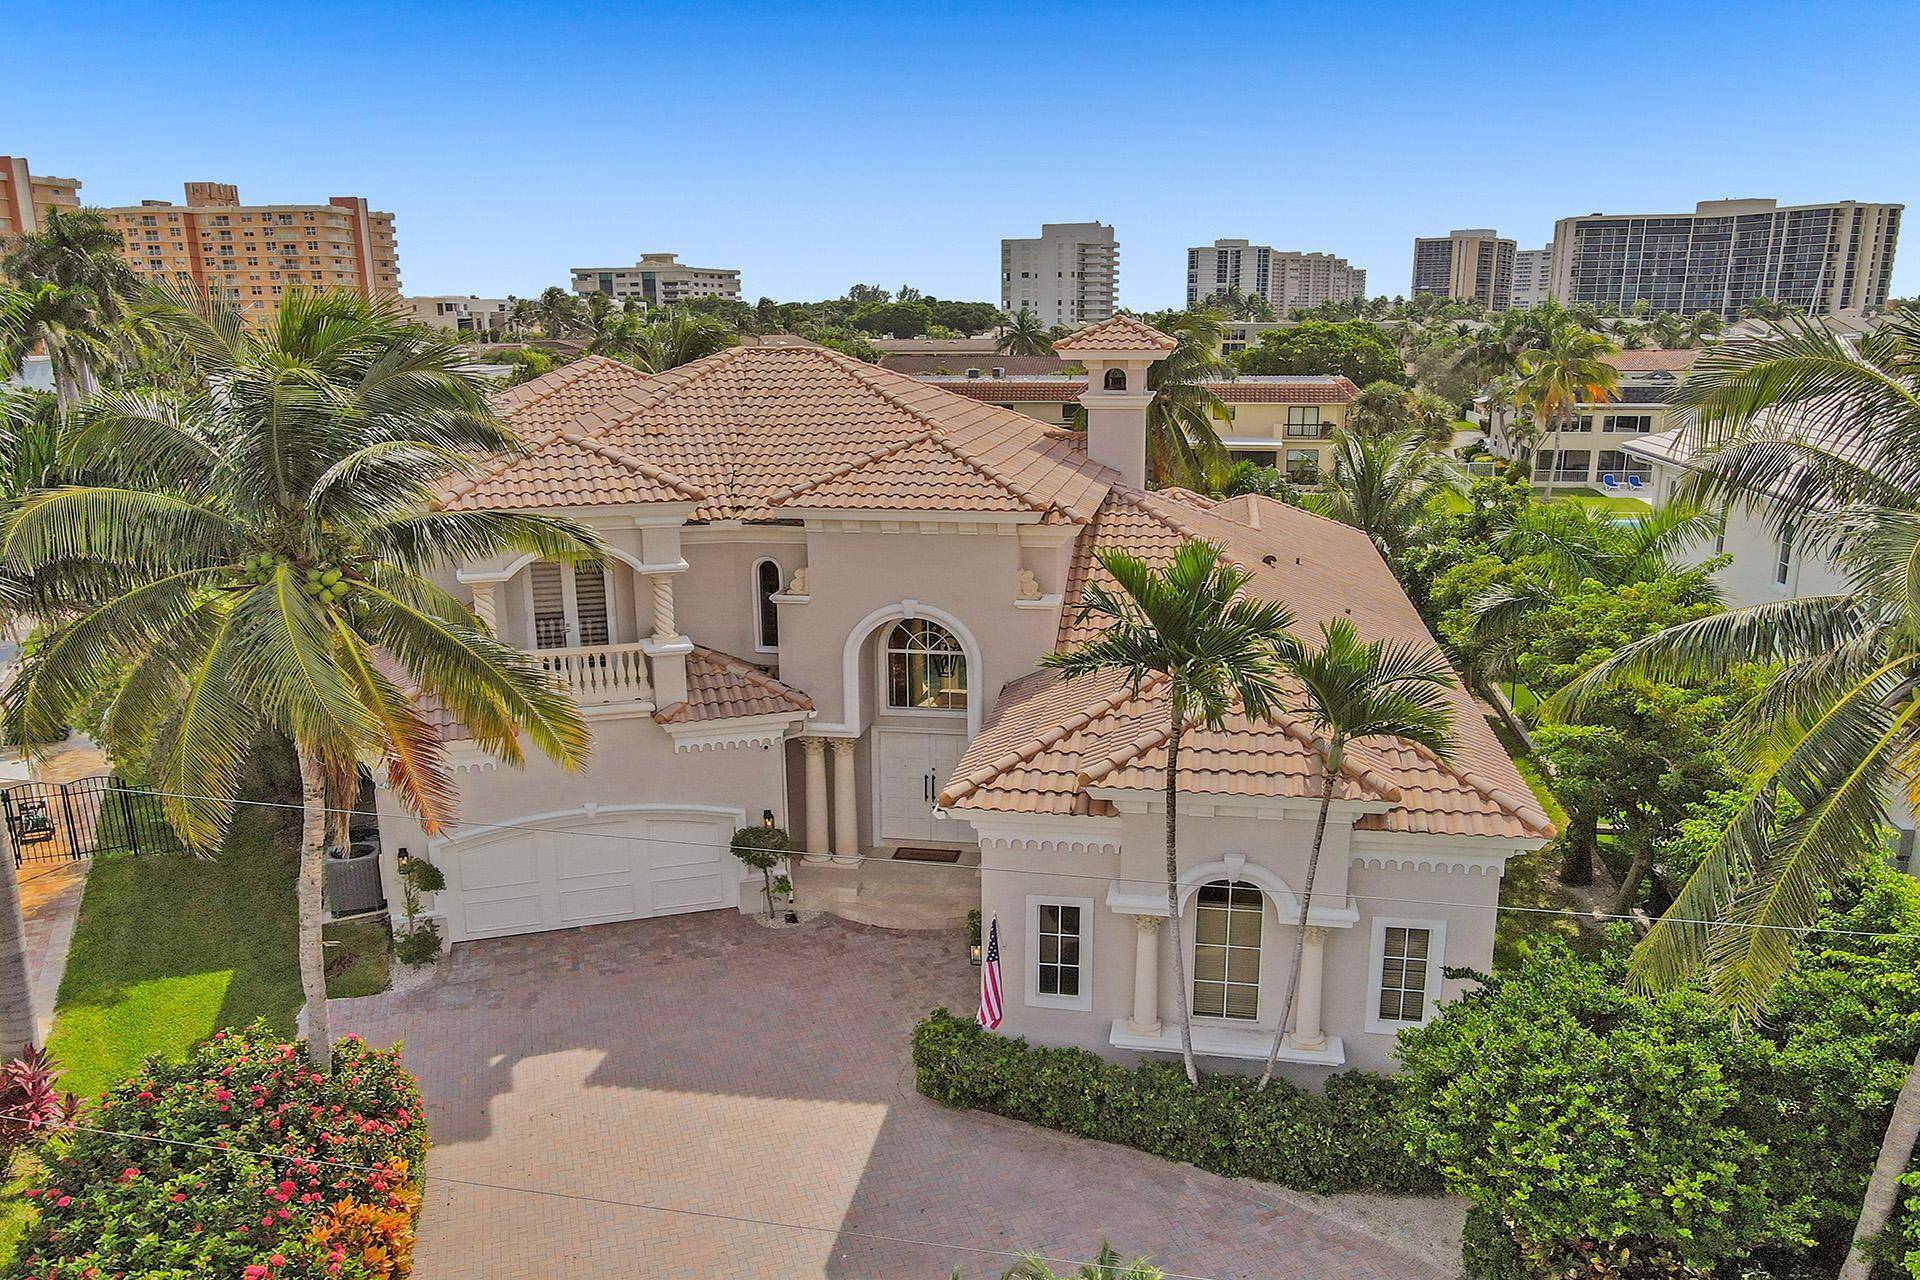 4430 Tranquility Drive single-family Palm Beach